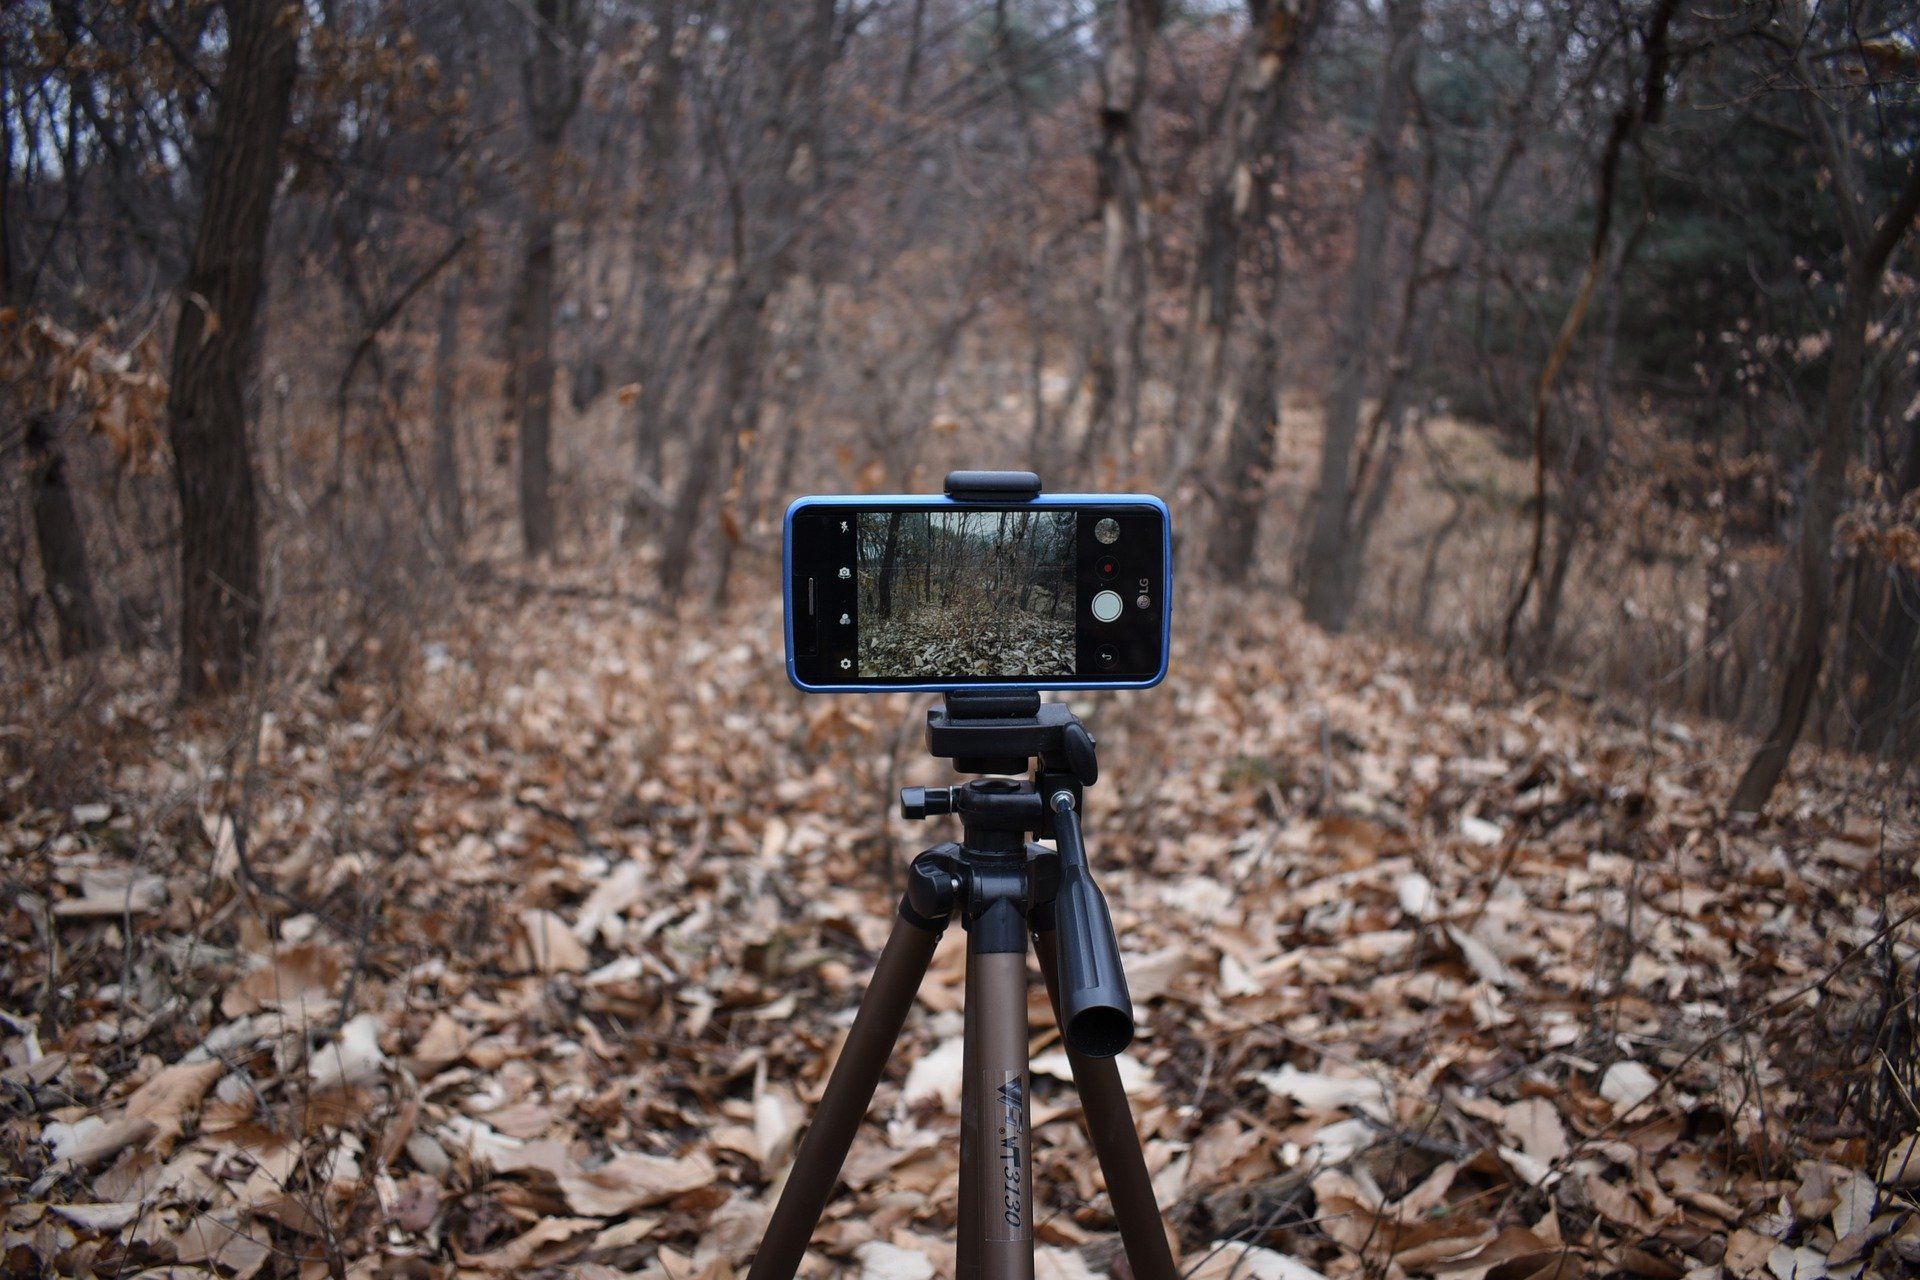 Smartphone on Tripod Recording in Woods